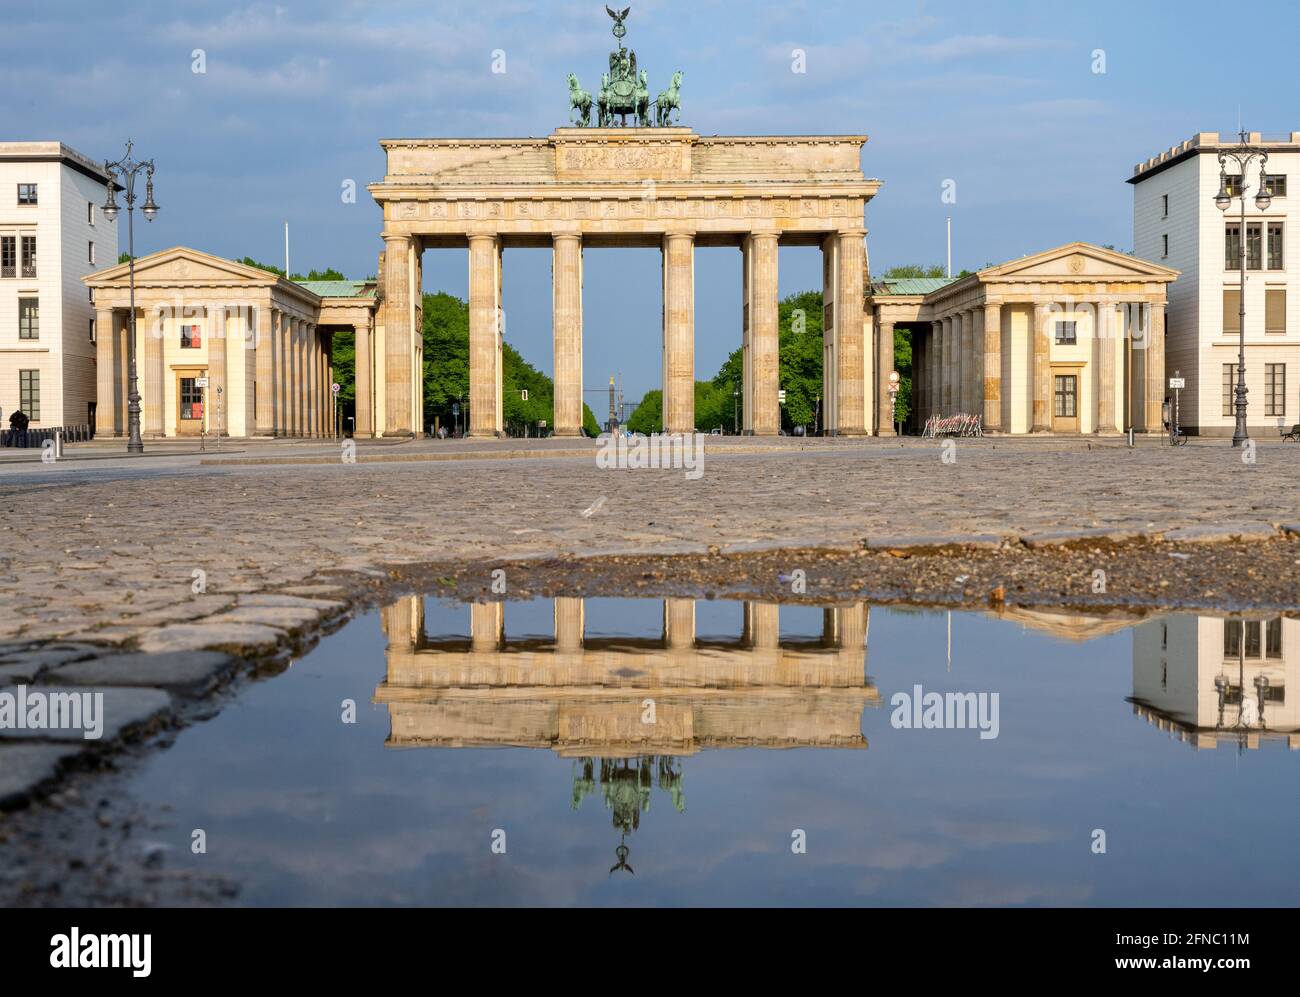 The famous Brandenburg Gate in Berlin reflected in a puddle Stock Photo